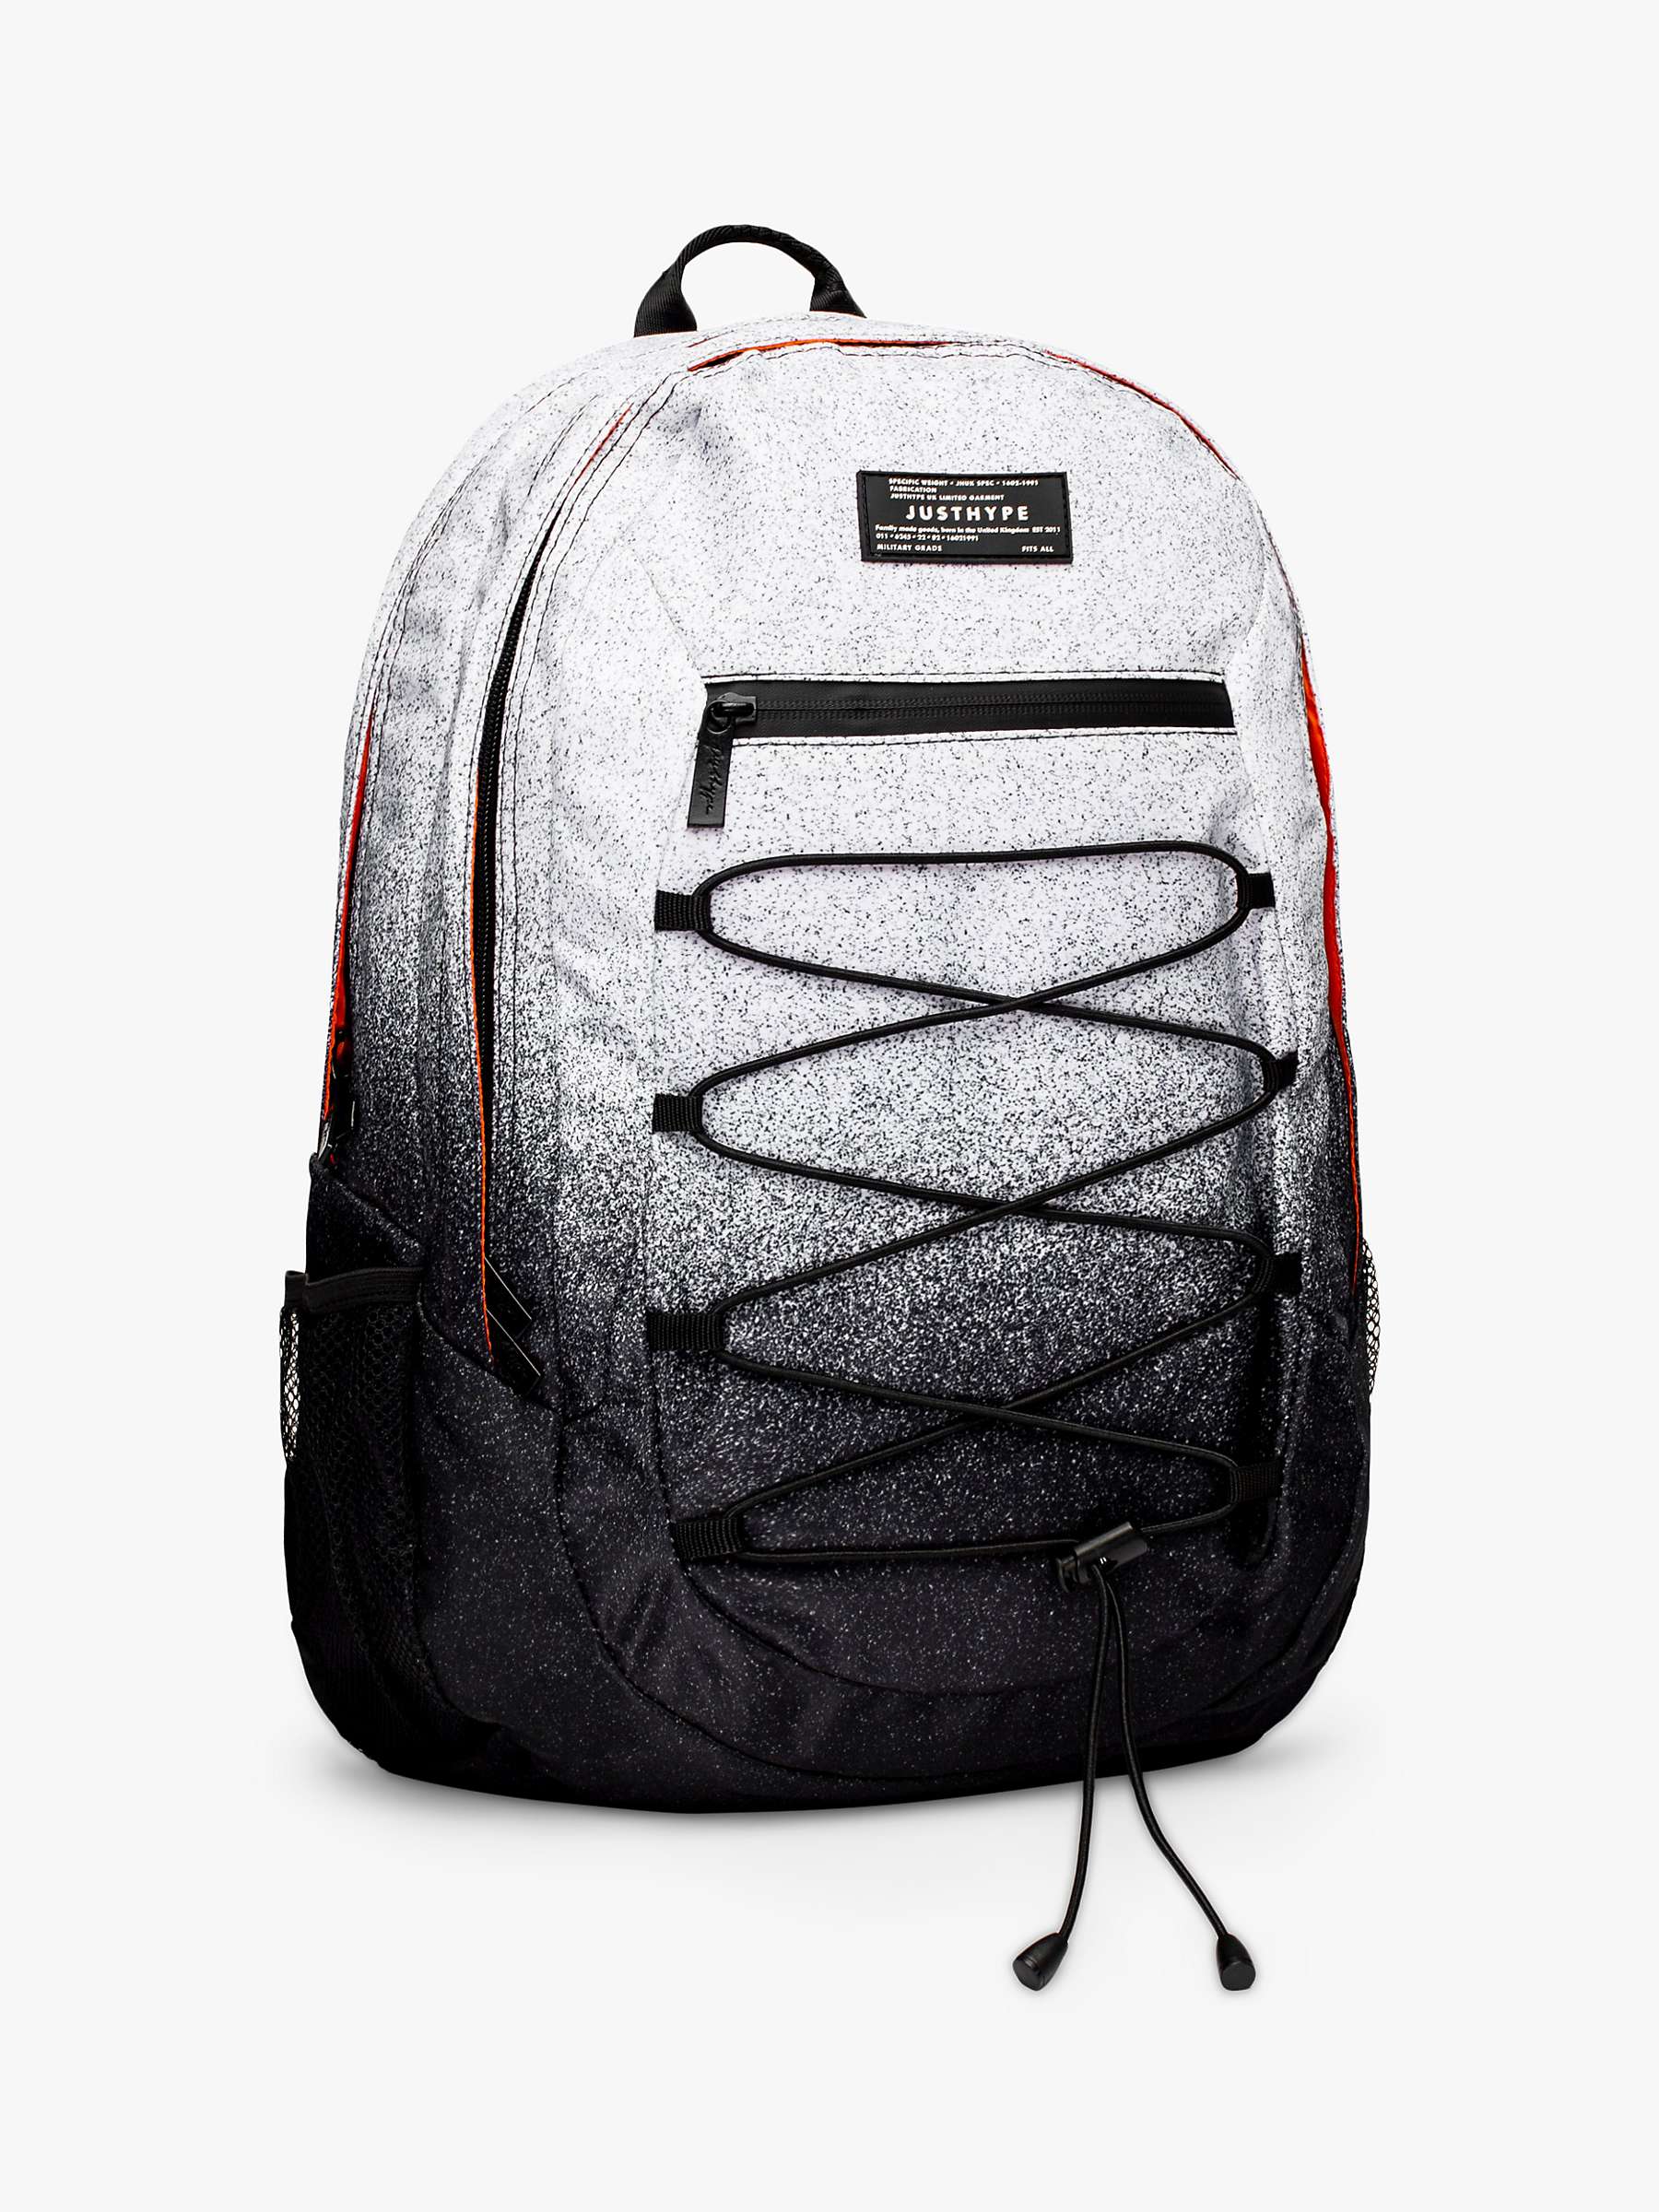 Buy Hype Kids' Speckle Fade Maxi Backpack, Black/White Online at johnlewis.com